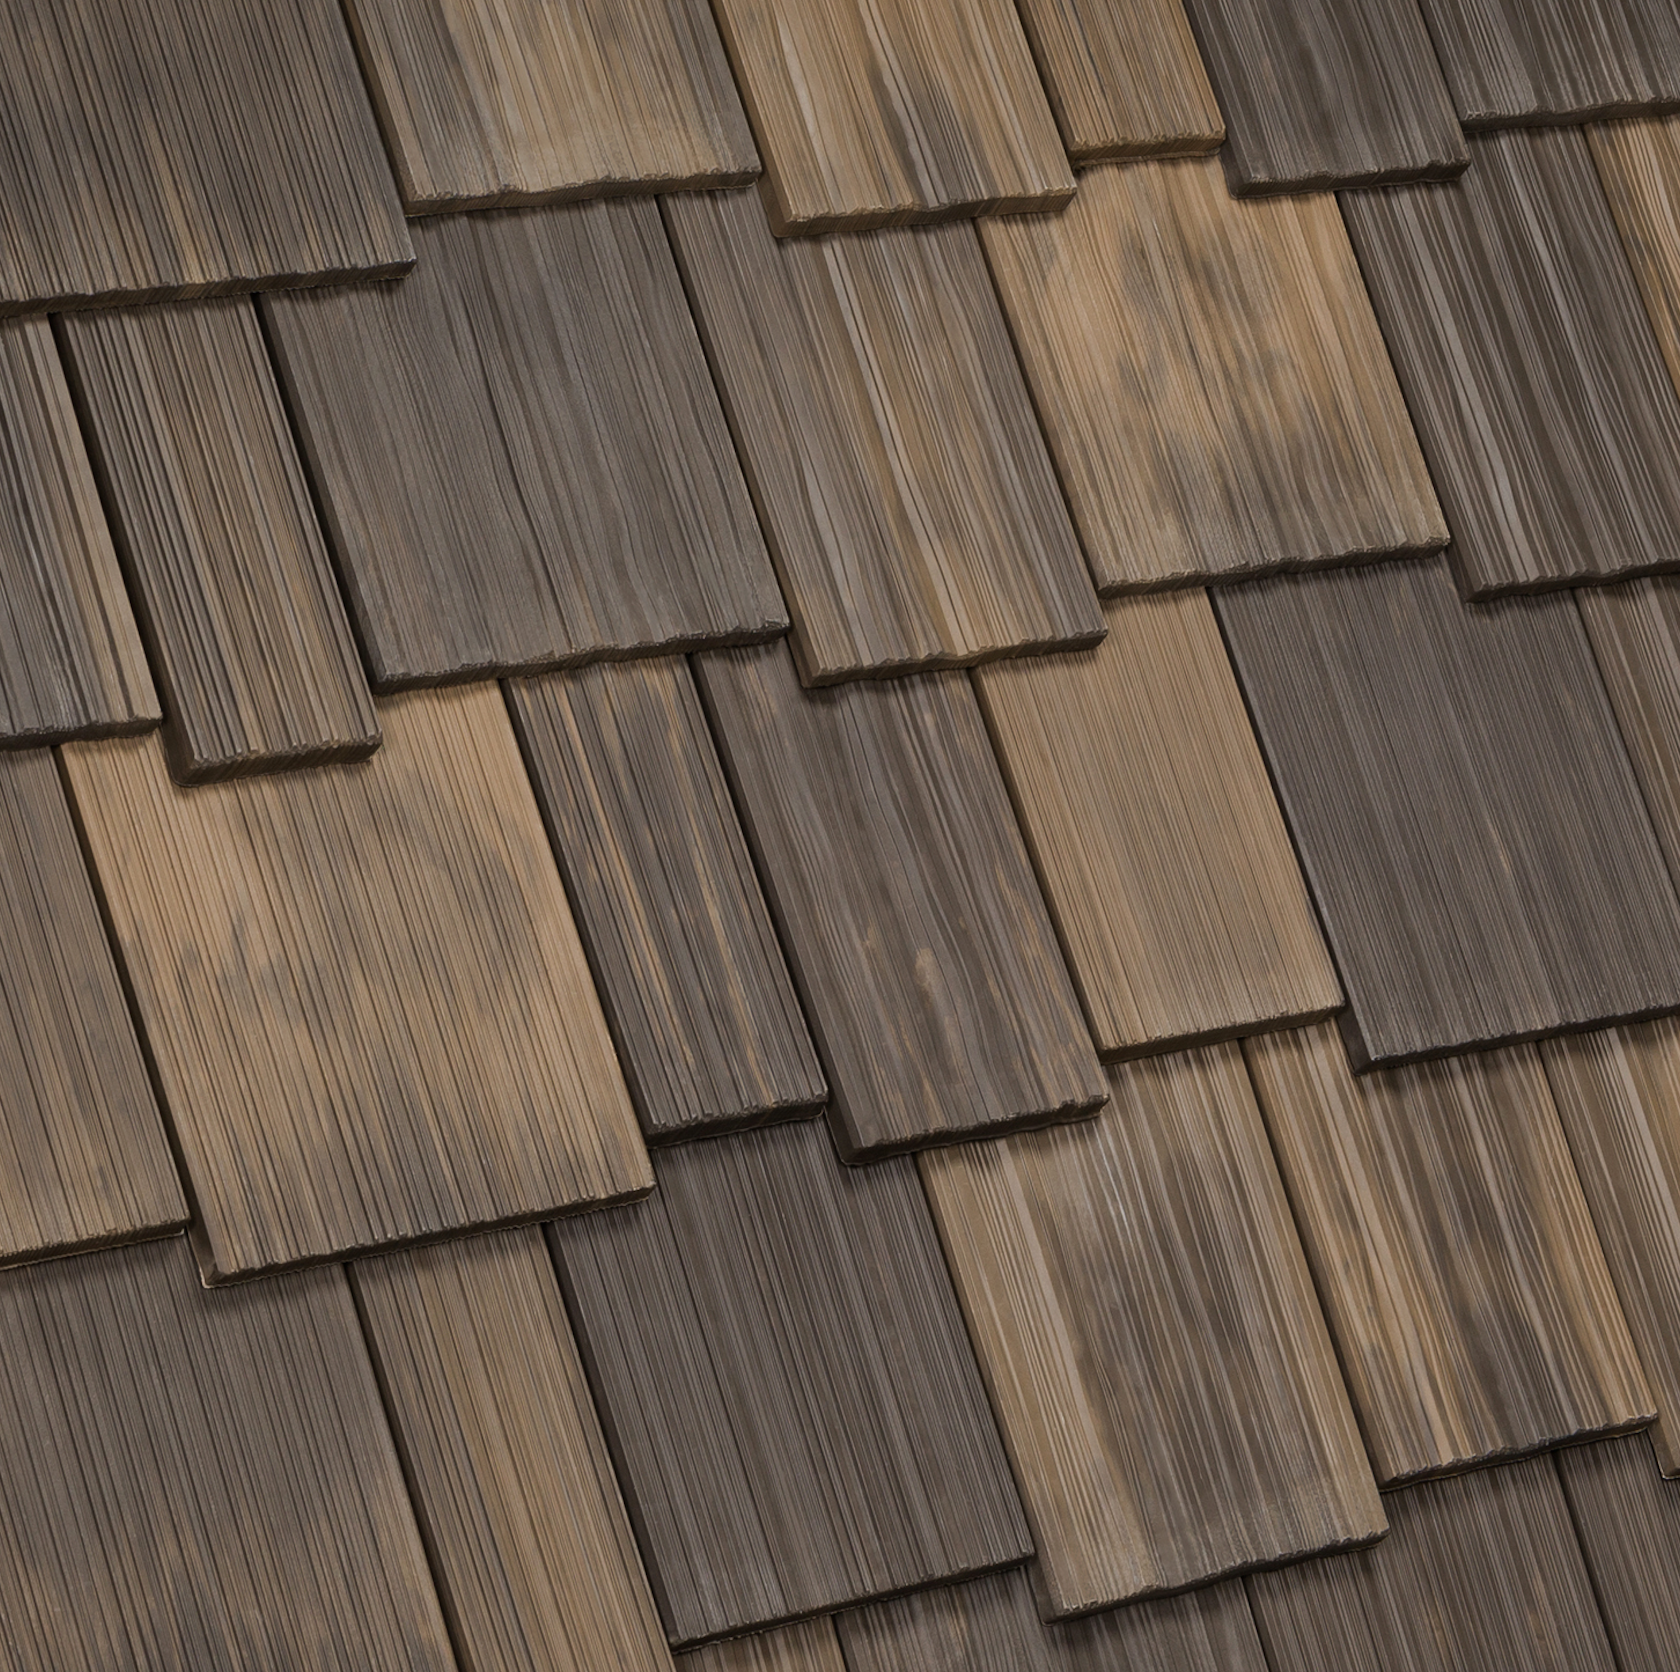 DaVinci Roofscapes launches the Nature Crafted Collection